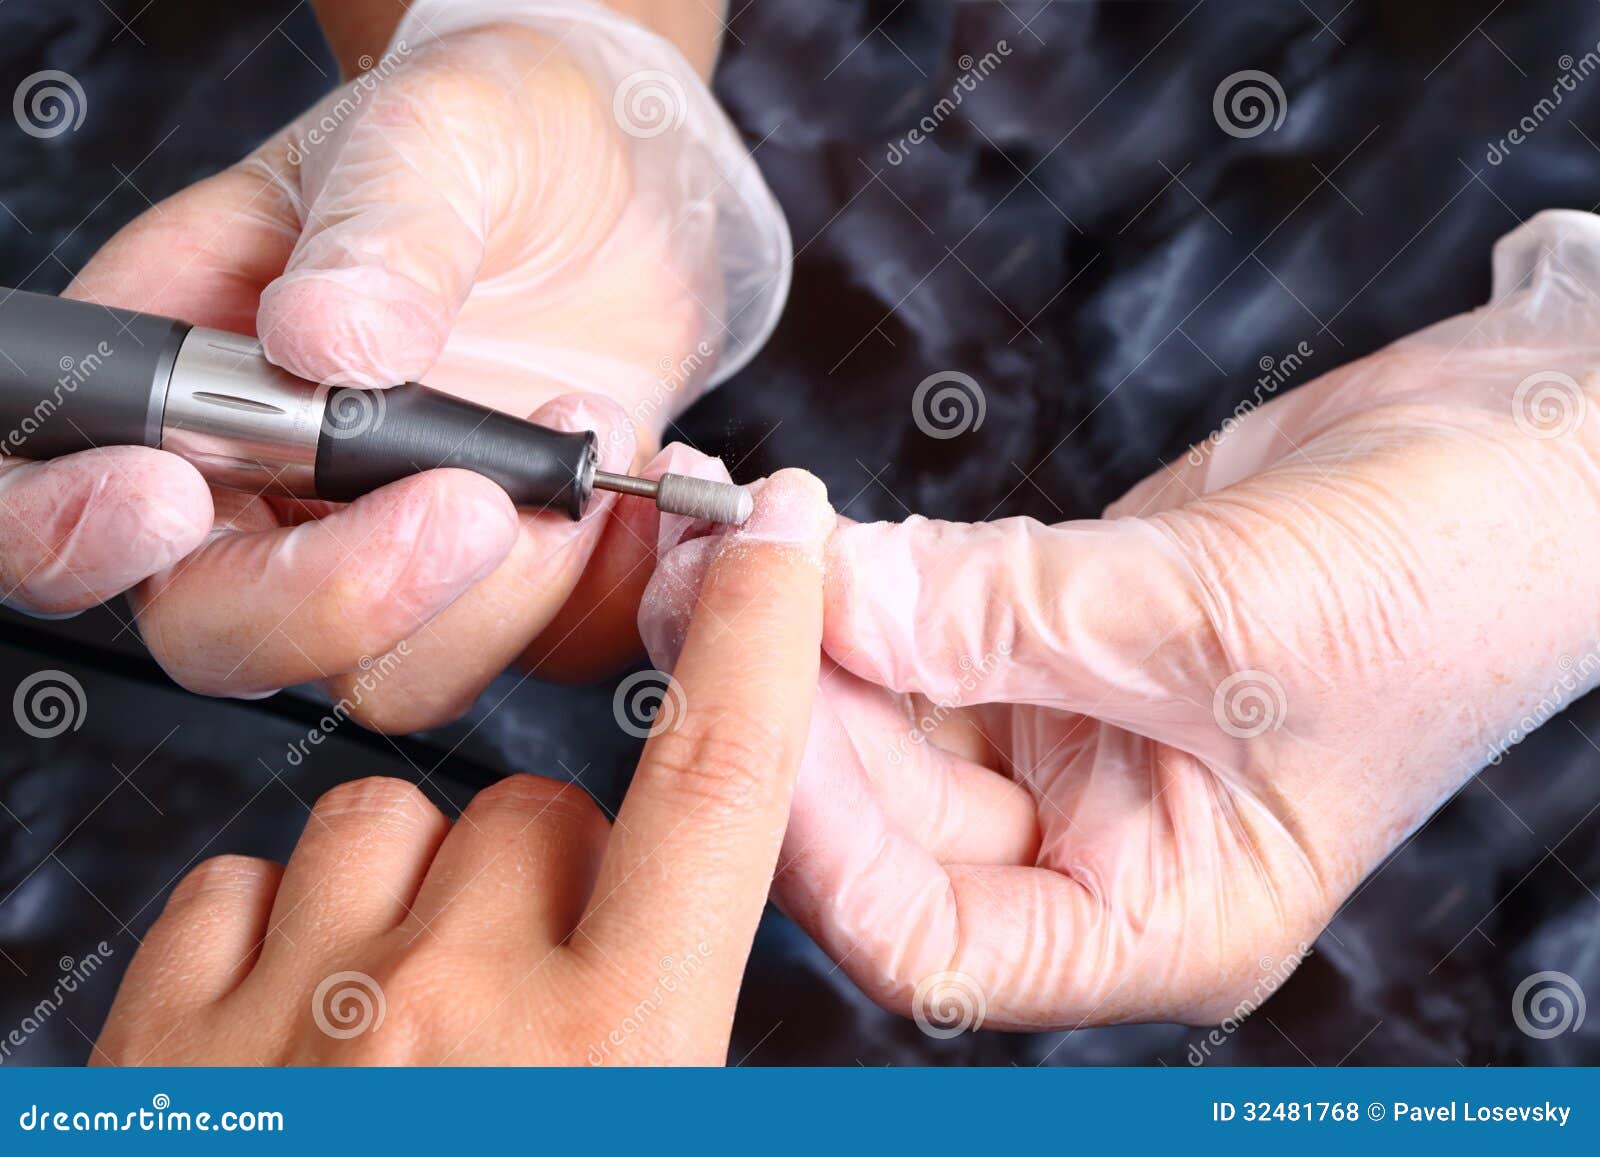 master in gloves uses an machine to remove the cuticle